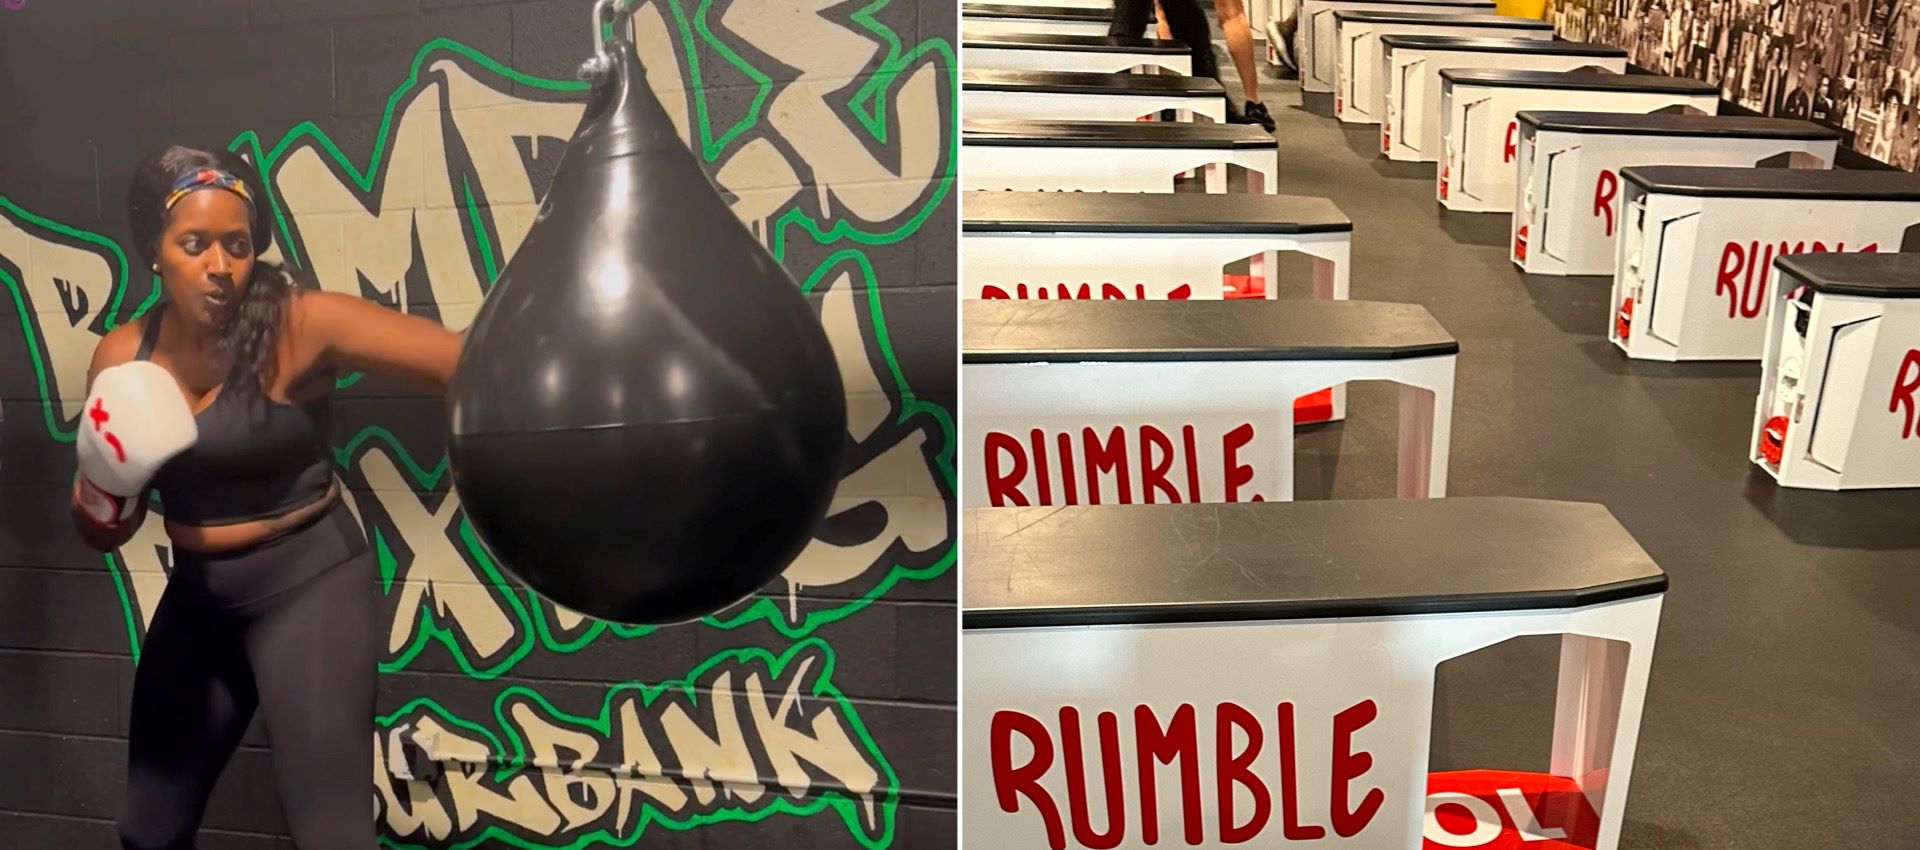 An image of a woman boxing next to gym benches with the Rumble logo.